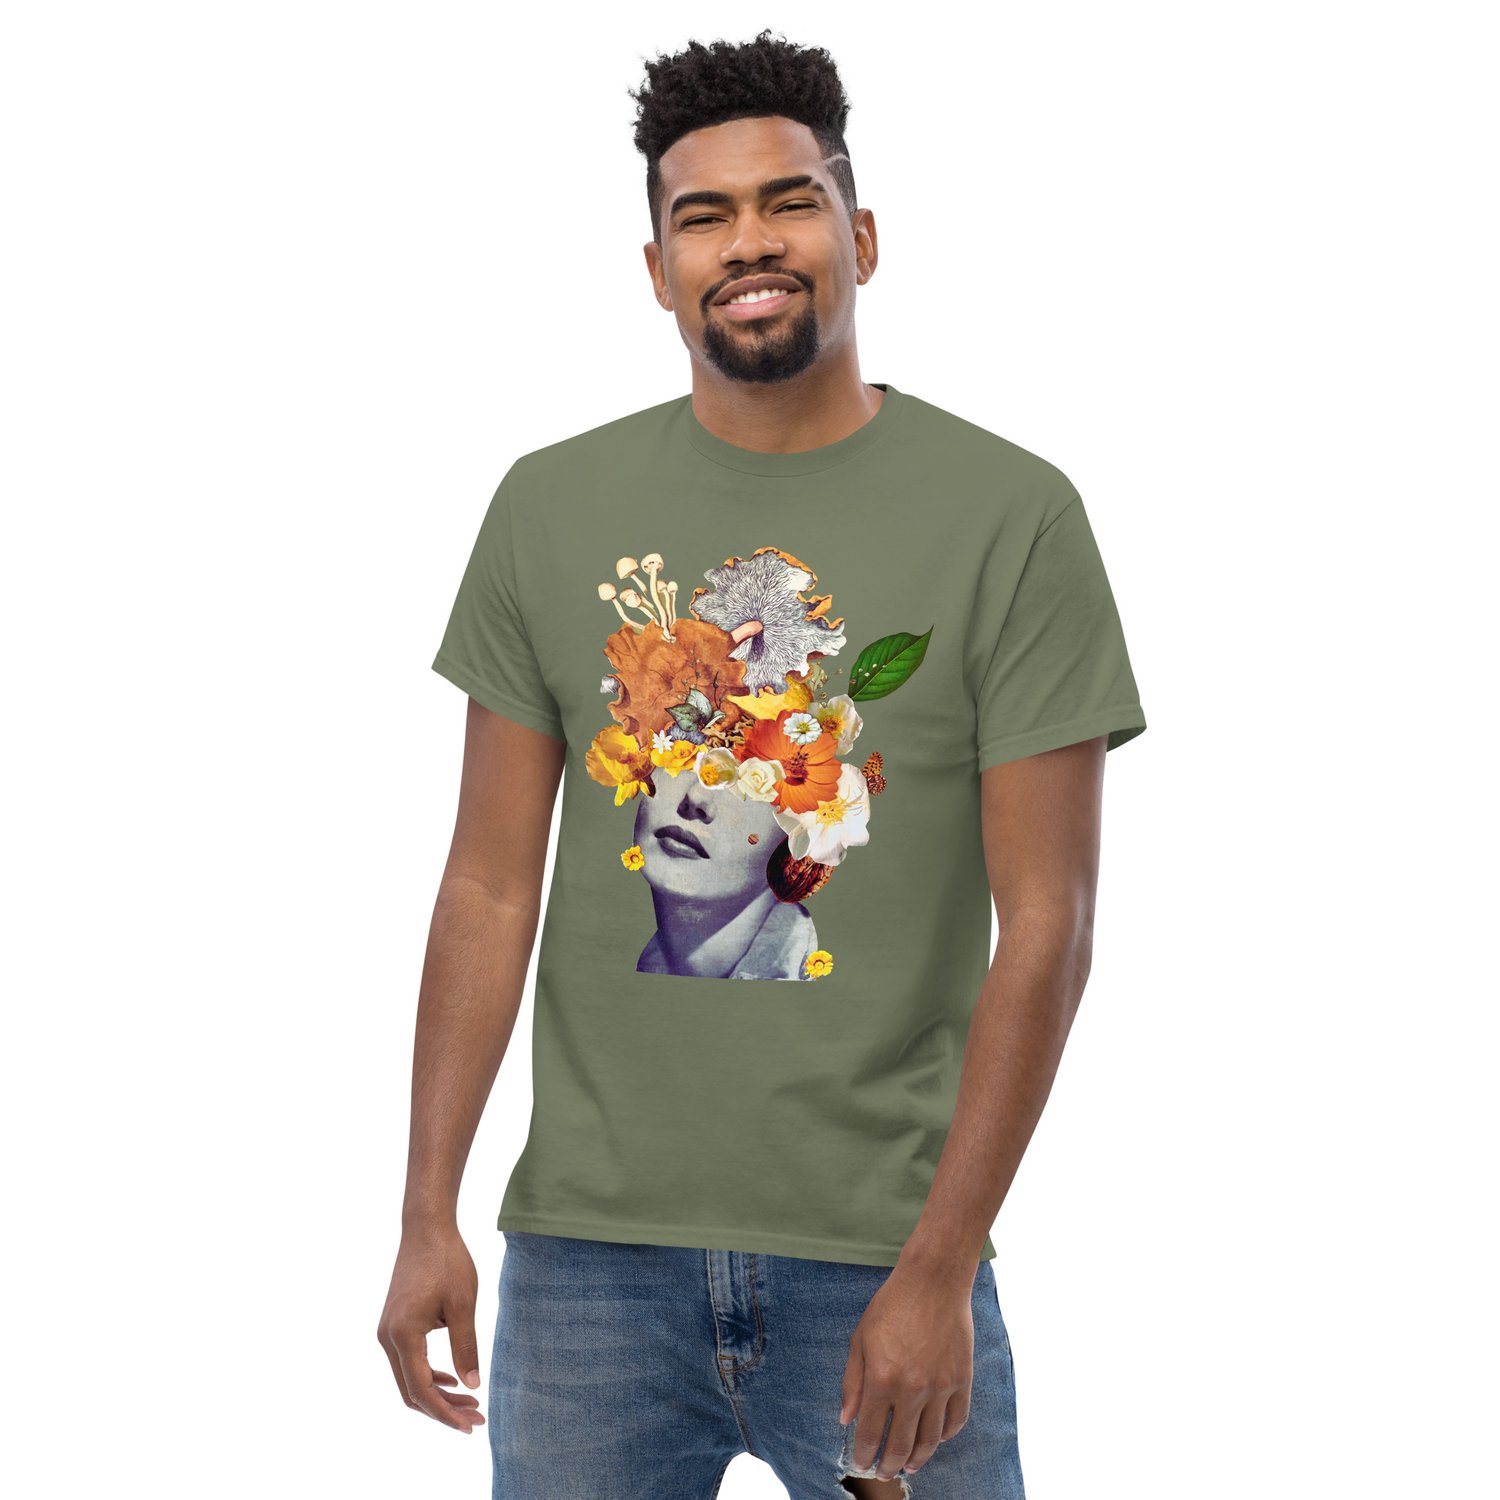 Image of She's A Little Nuts -  Men's Lightweight Cotton Tee - Available in 4 Colors